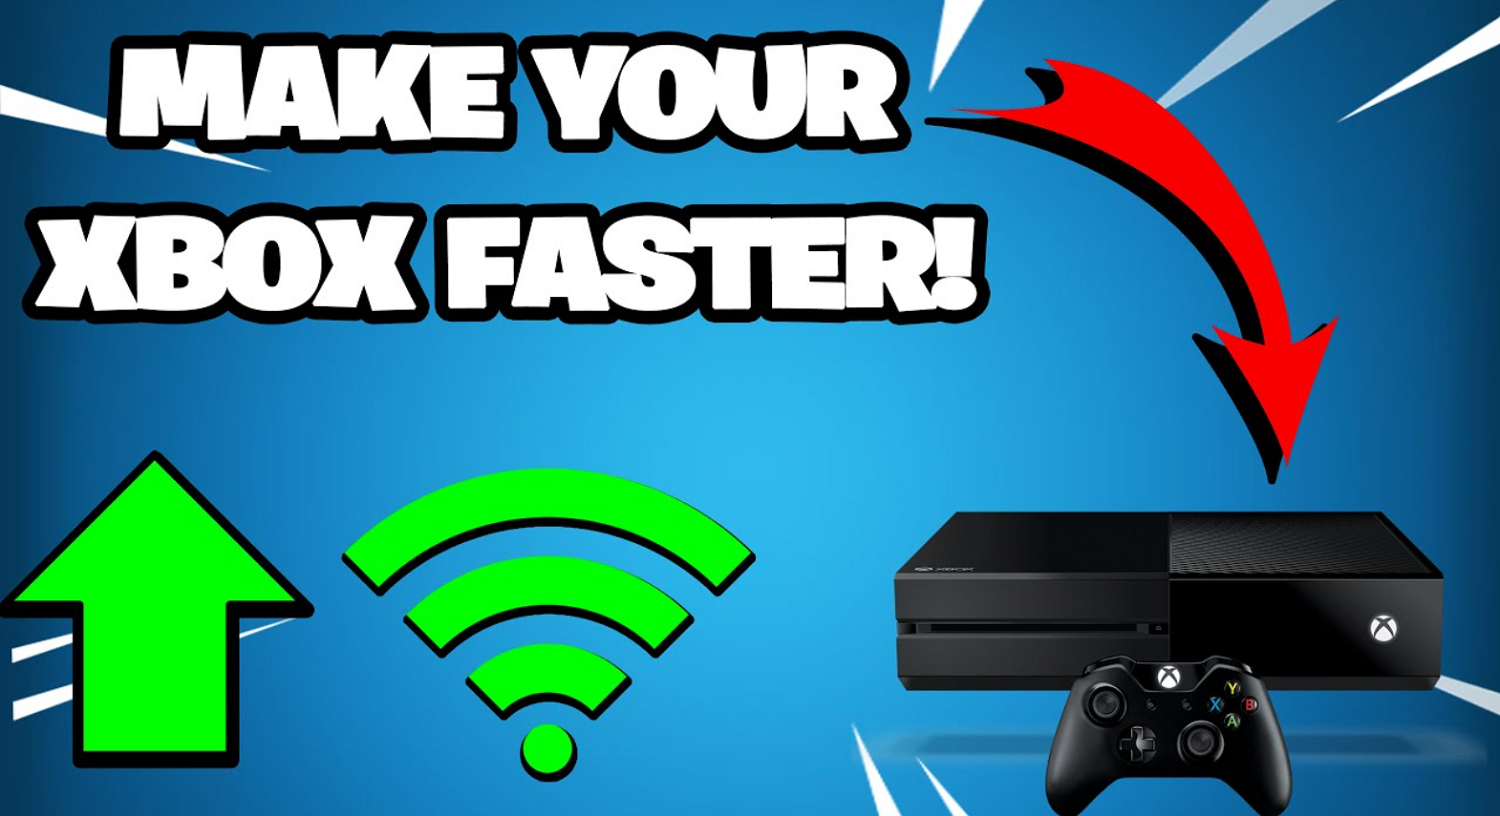 xbox faster